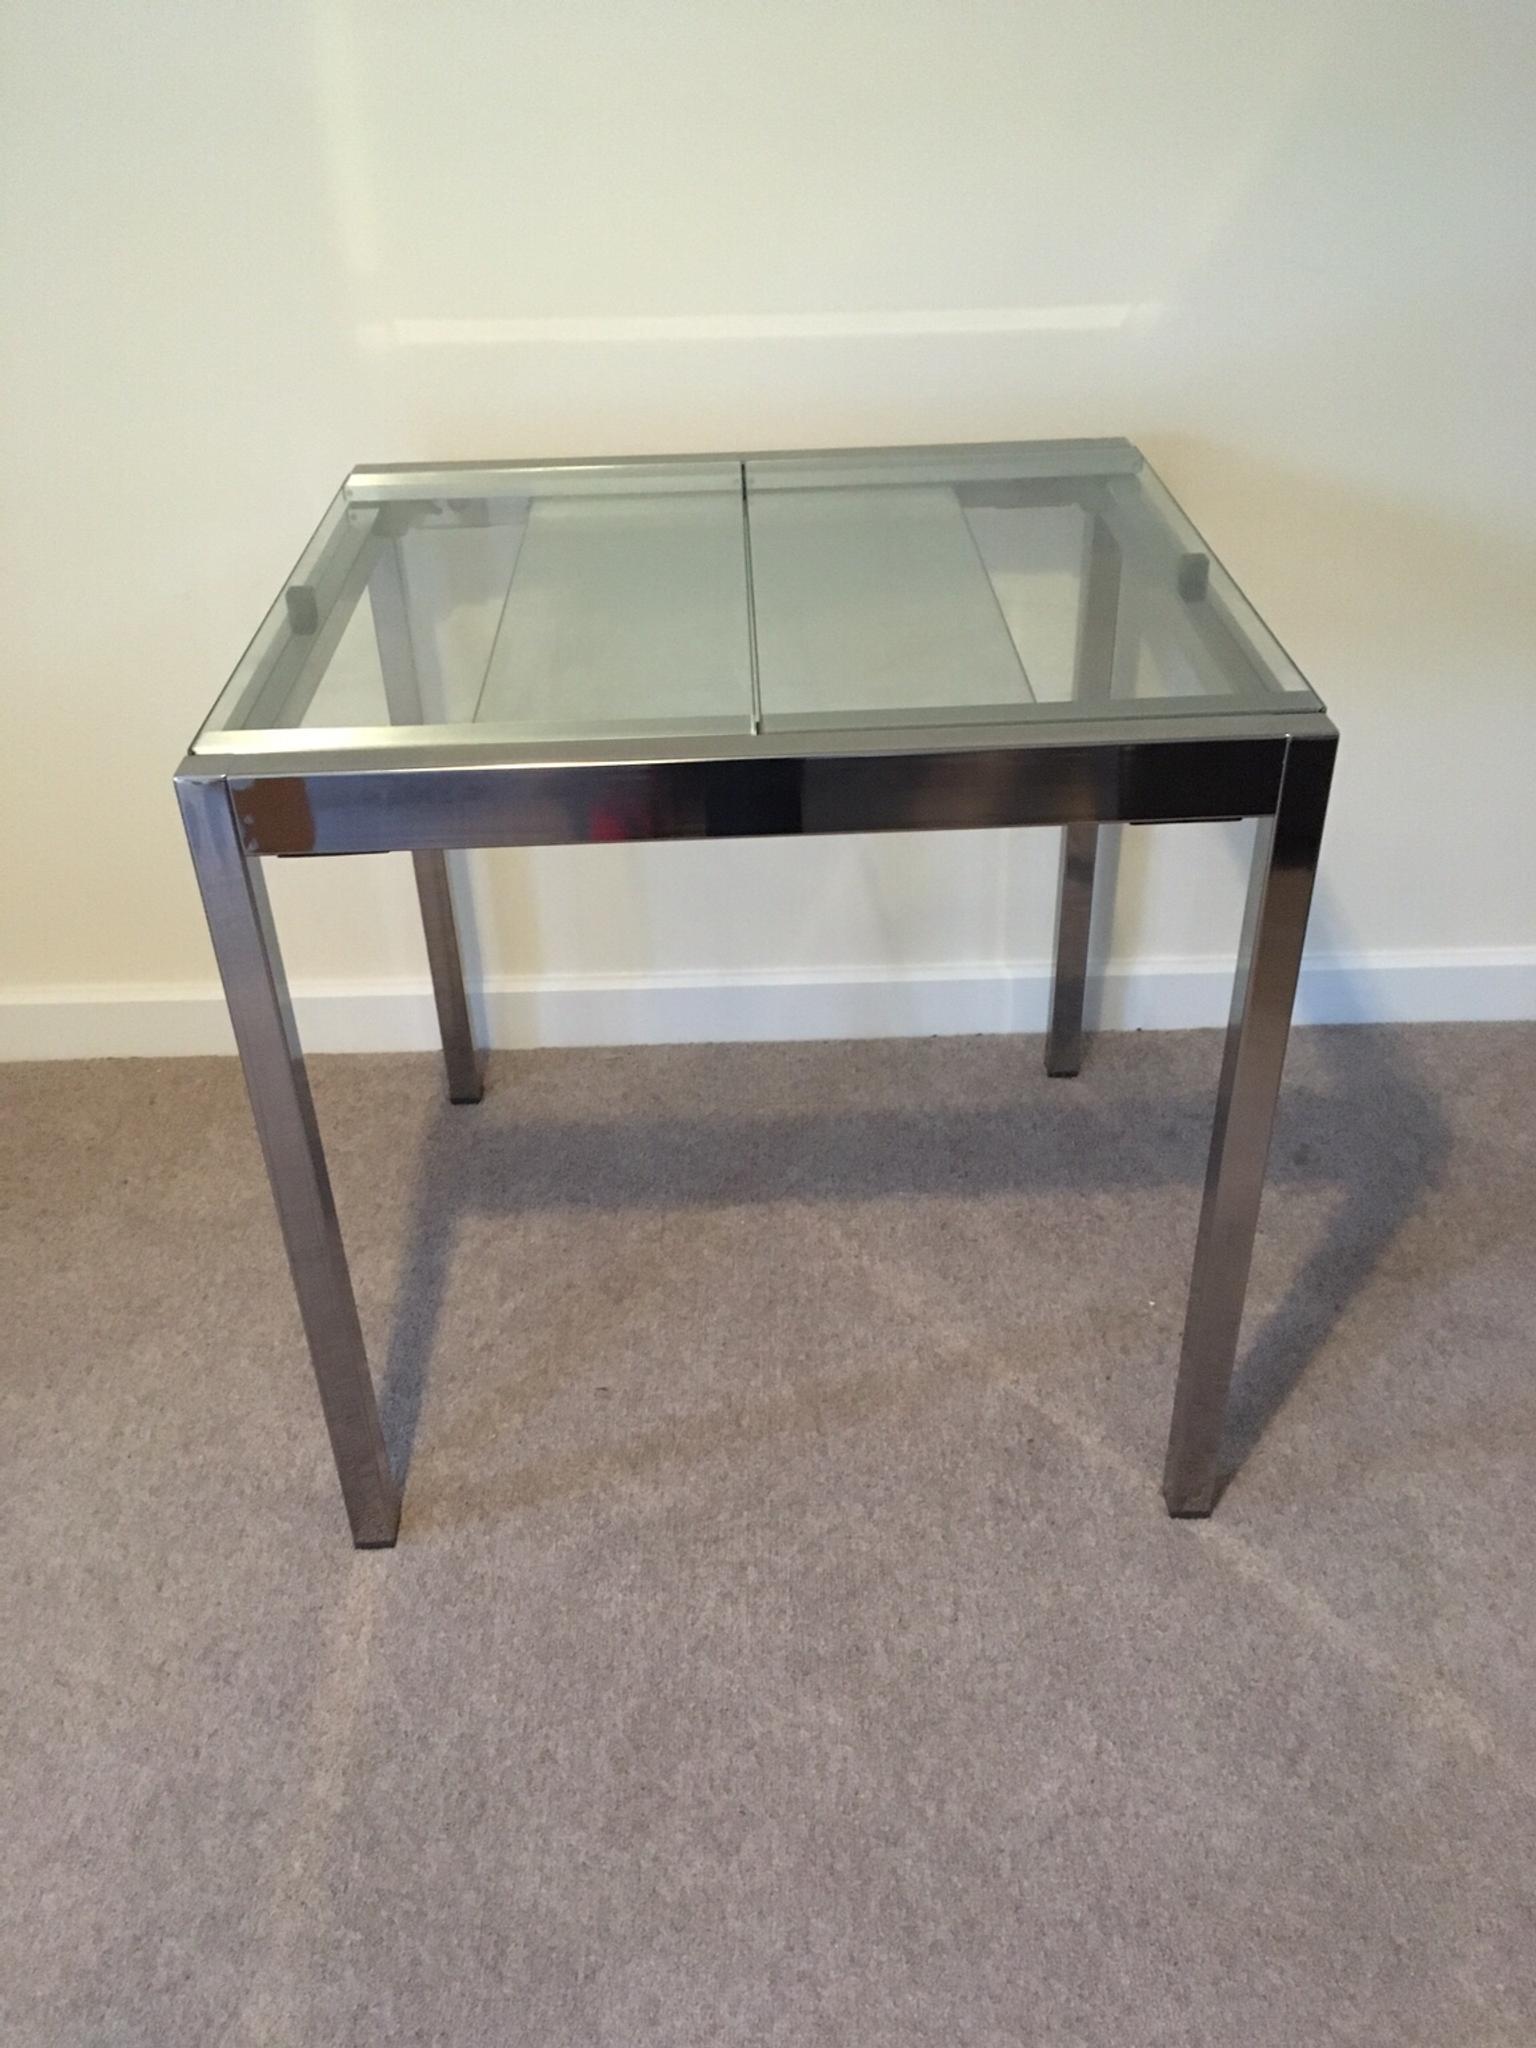 Ikea Extendable Glass Dining Table In Rh20 Horsham For 50 00 For Sale Shpock